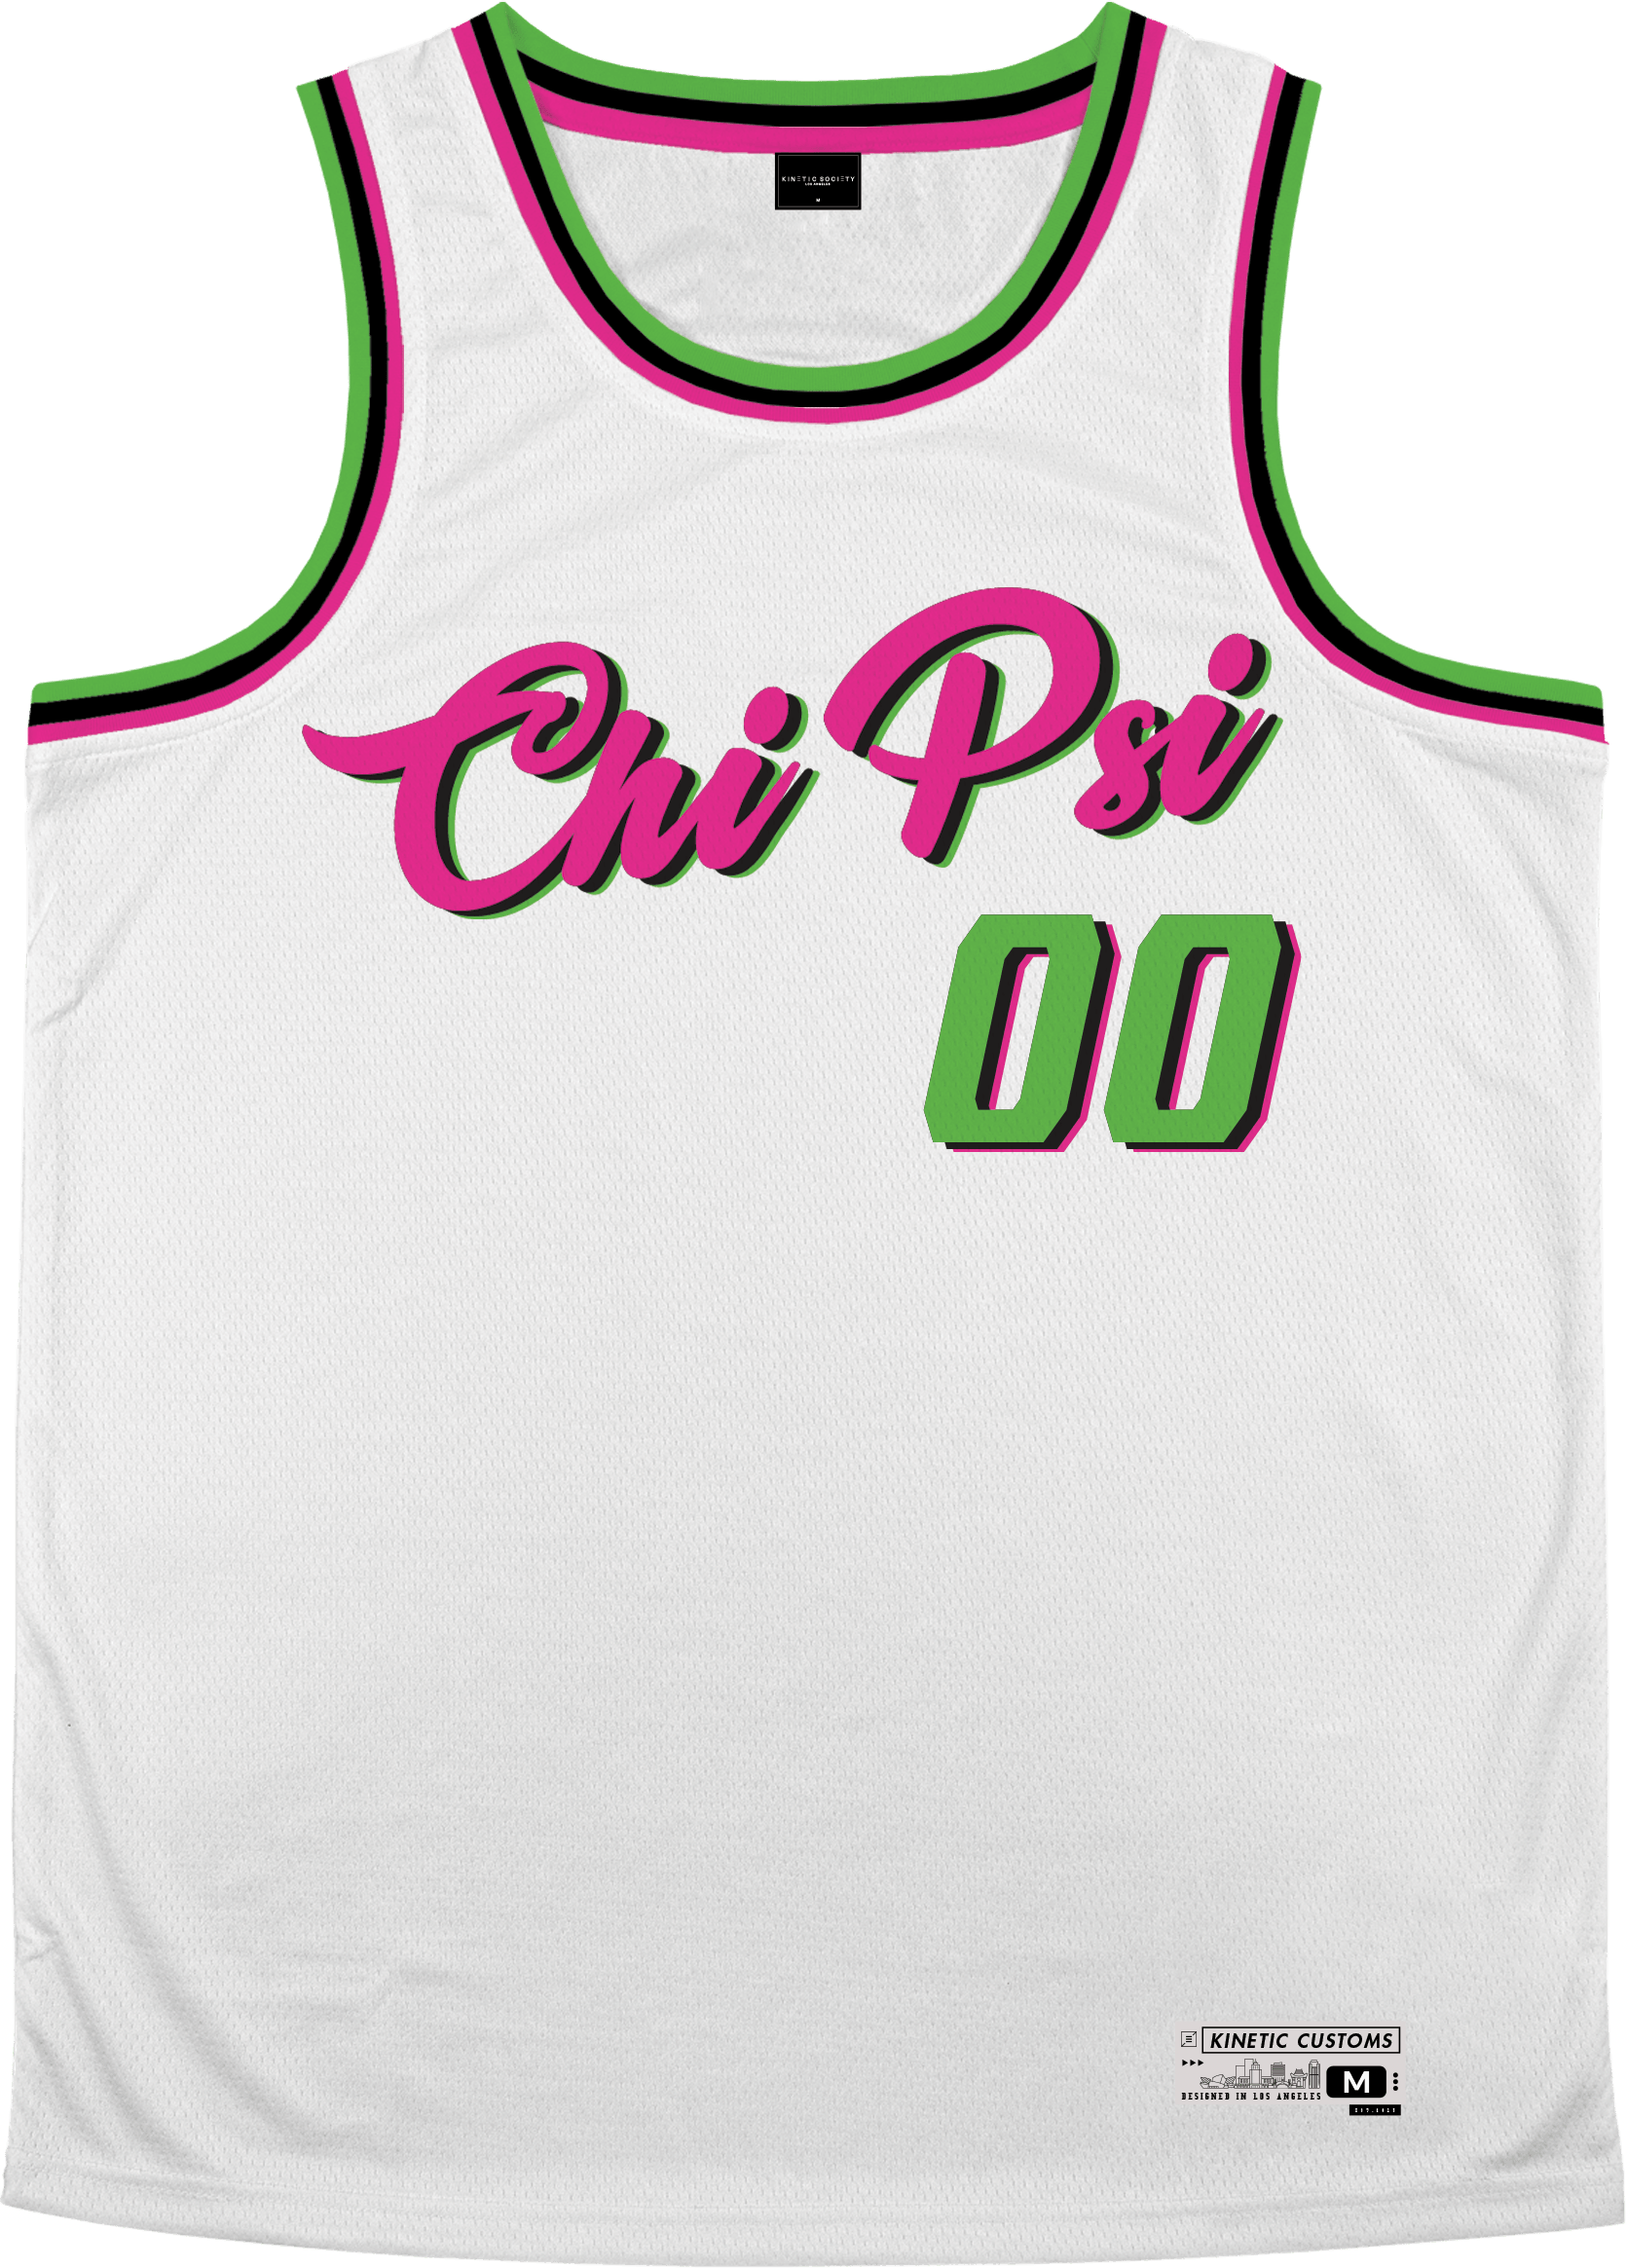 Chi Psi - Bubble Gum Basketball Jersey - Kinetic Society